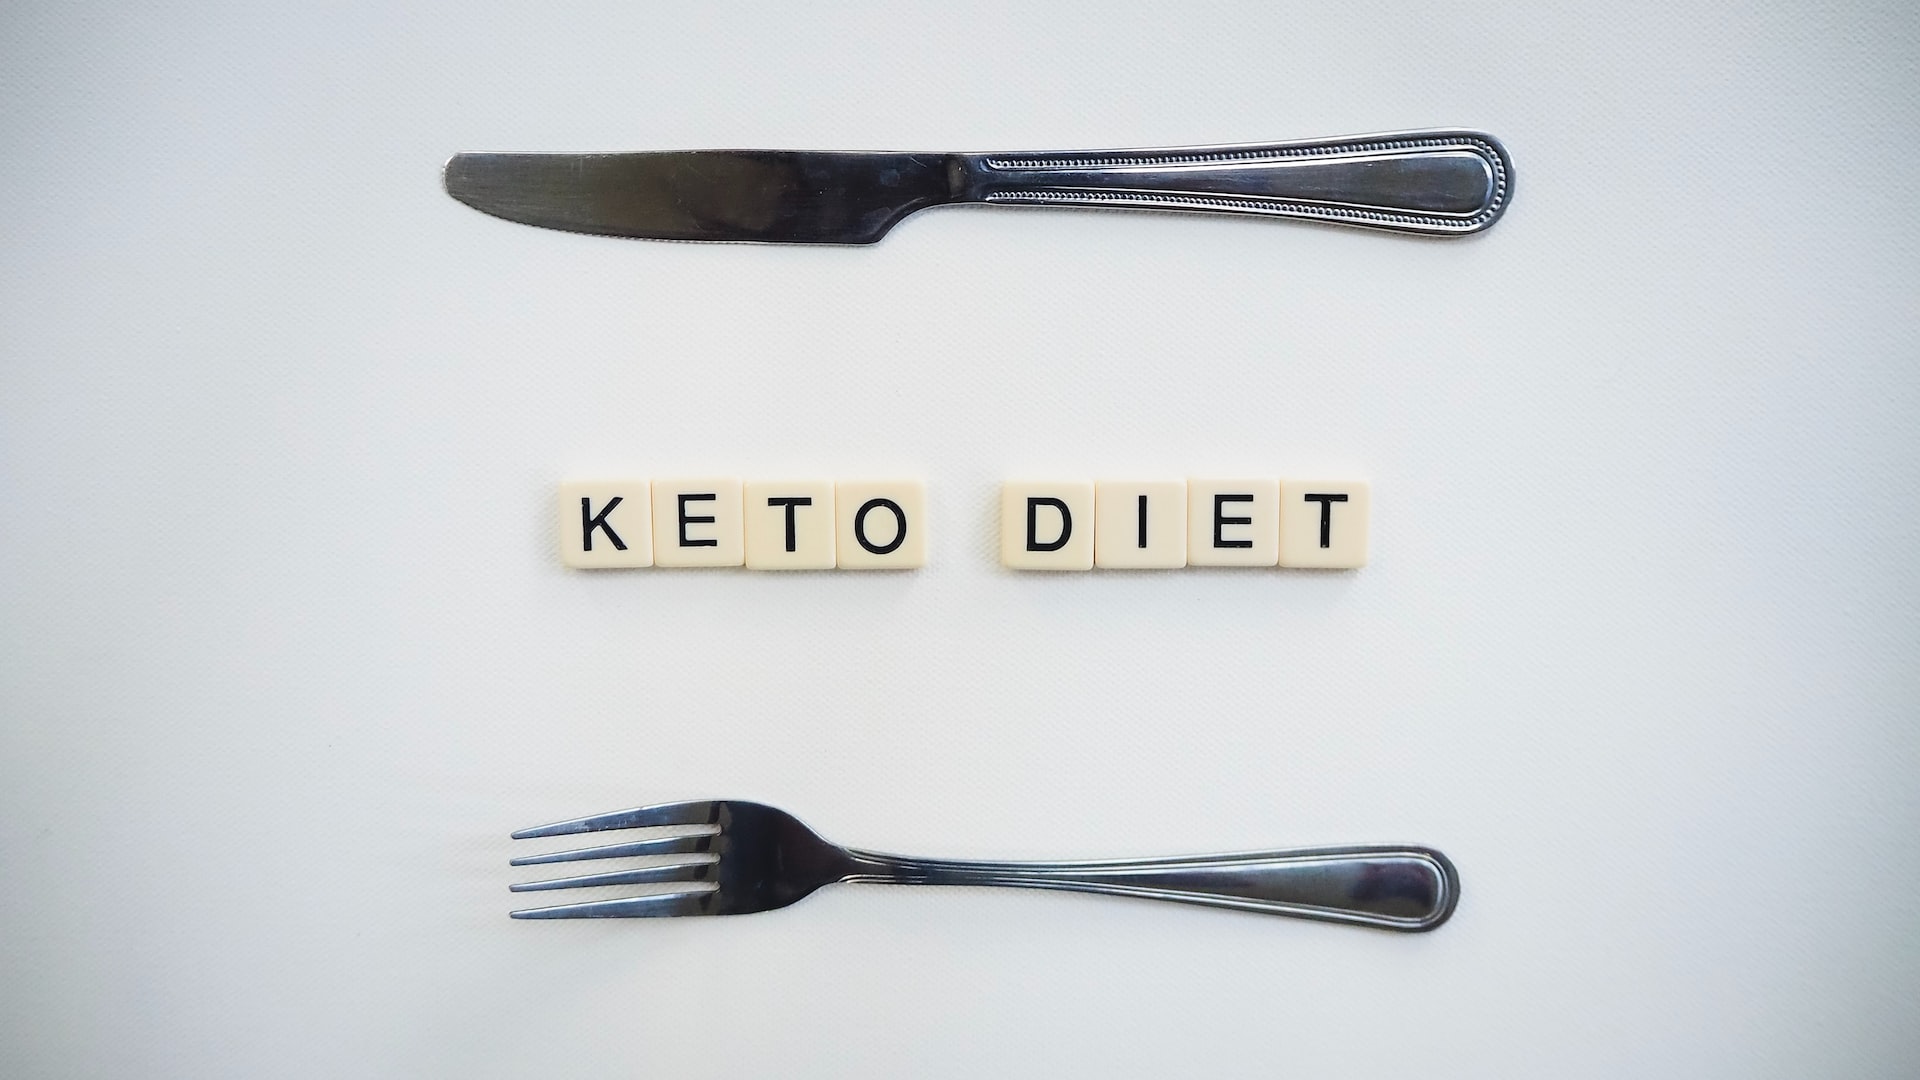 Is the Ketogenic Diet All It’s Cracked Up to Be?